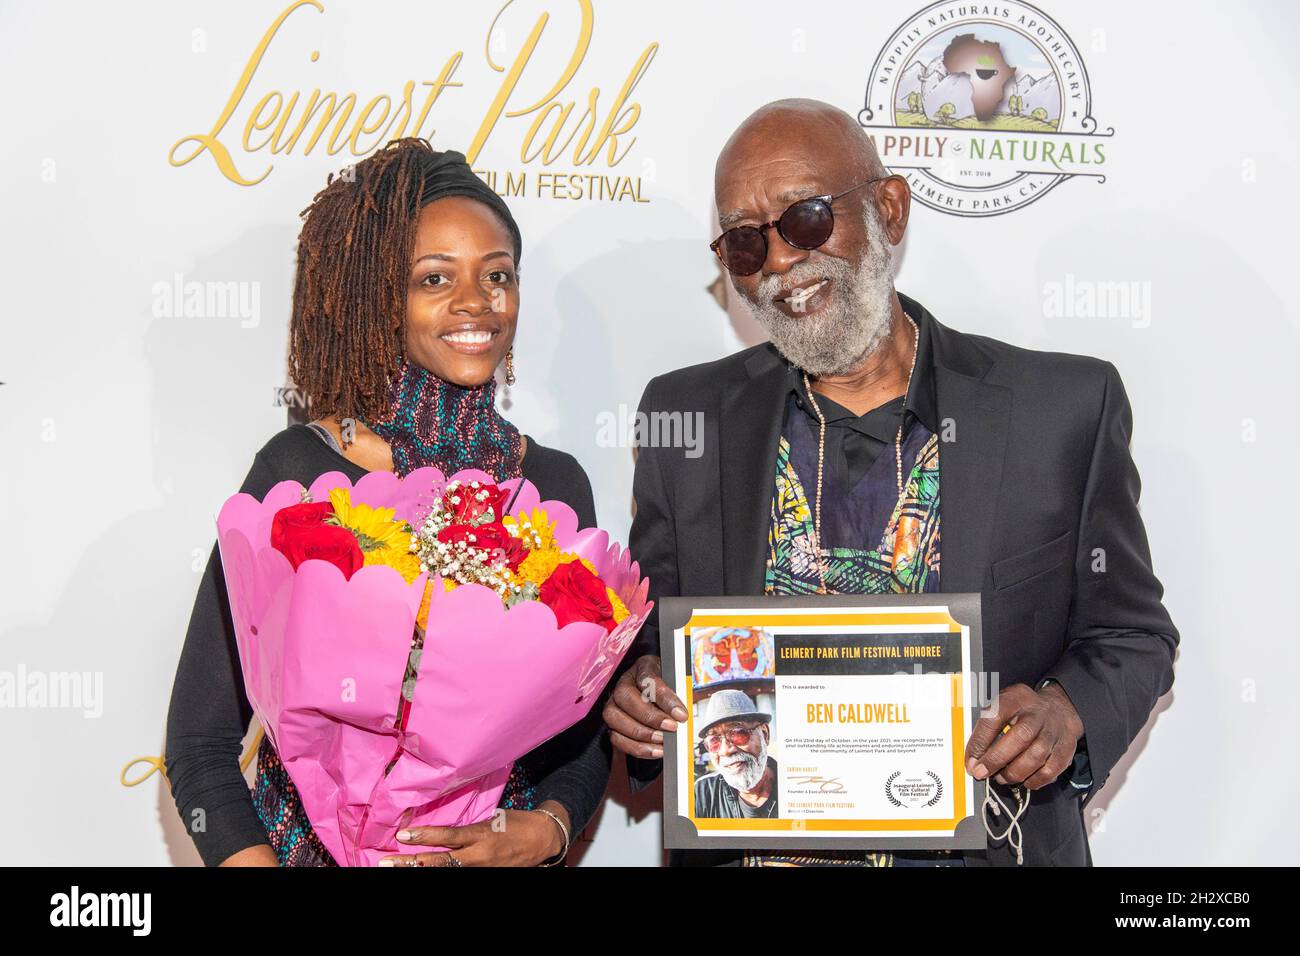 Los Angeles, CA on October 23, 2021, Shannan 'MsDramaganza' Tubbs, Ben Caldwell attend The Leimert Park Cultural Film Festival at The Alley, Los Angeles, CA on October 23, 2021 Stock Photo